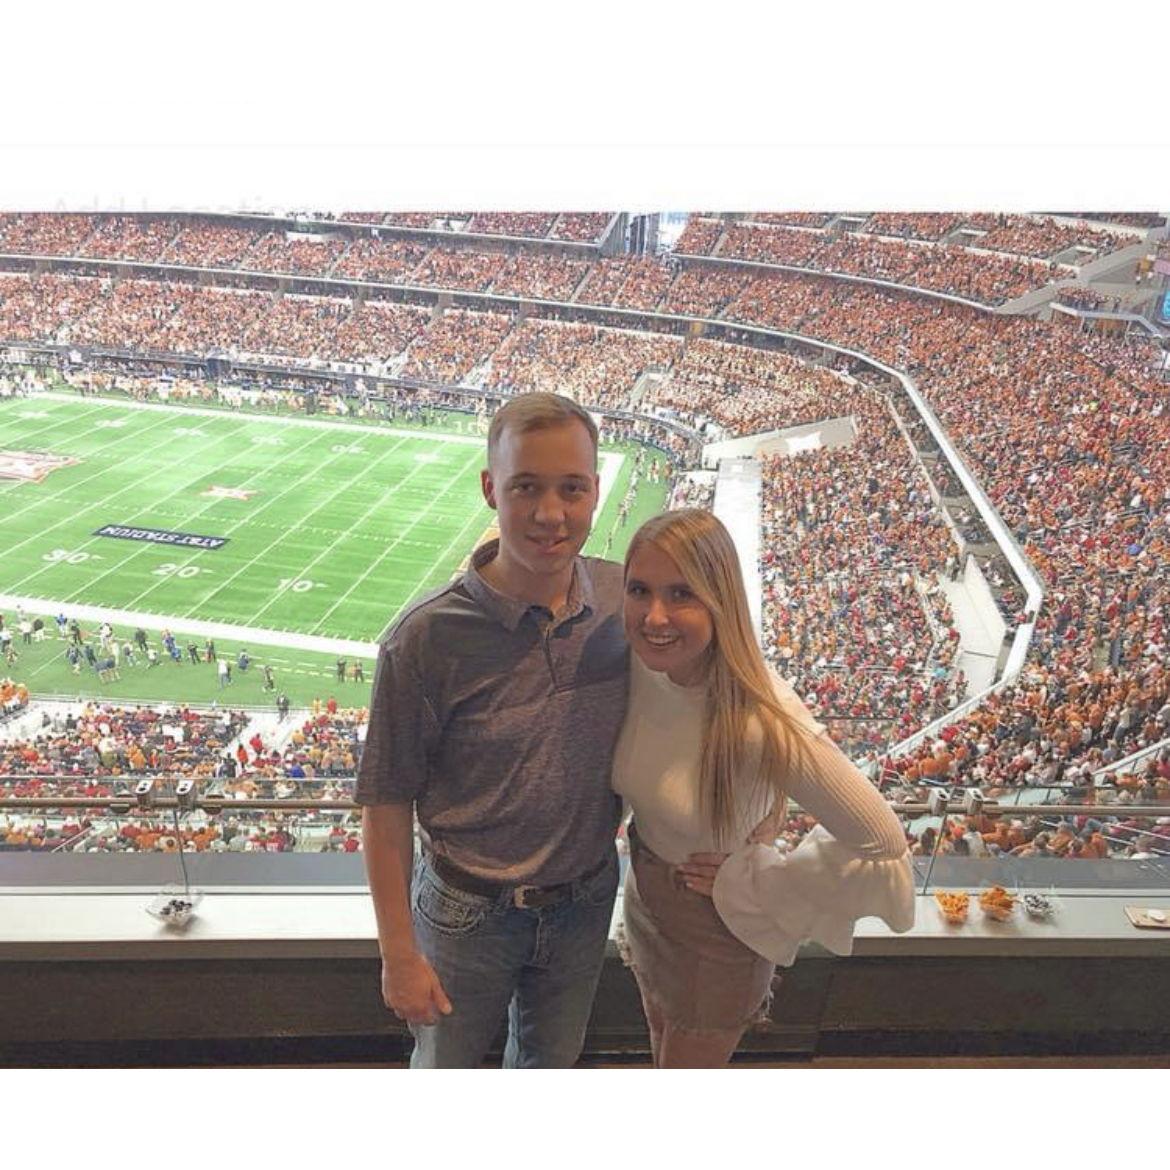 We went to the UT vs OU college championship game!